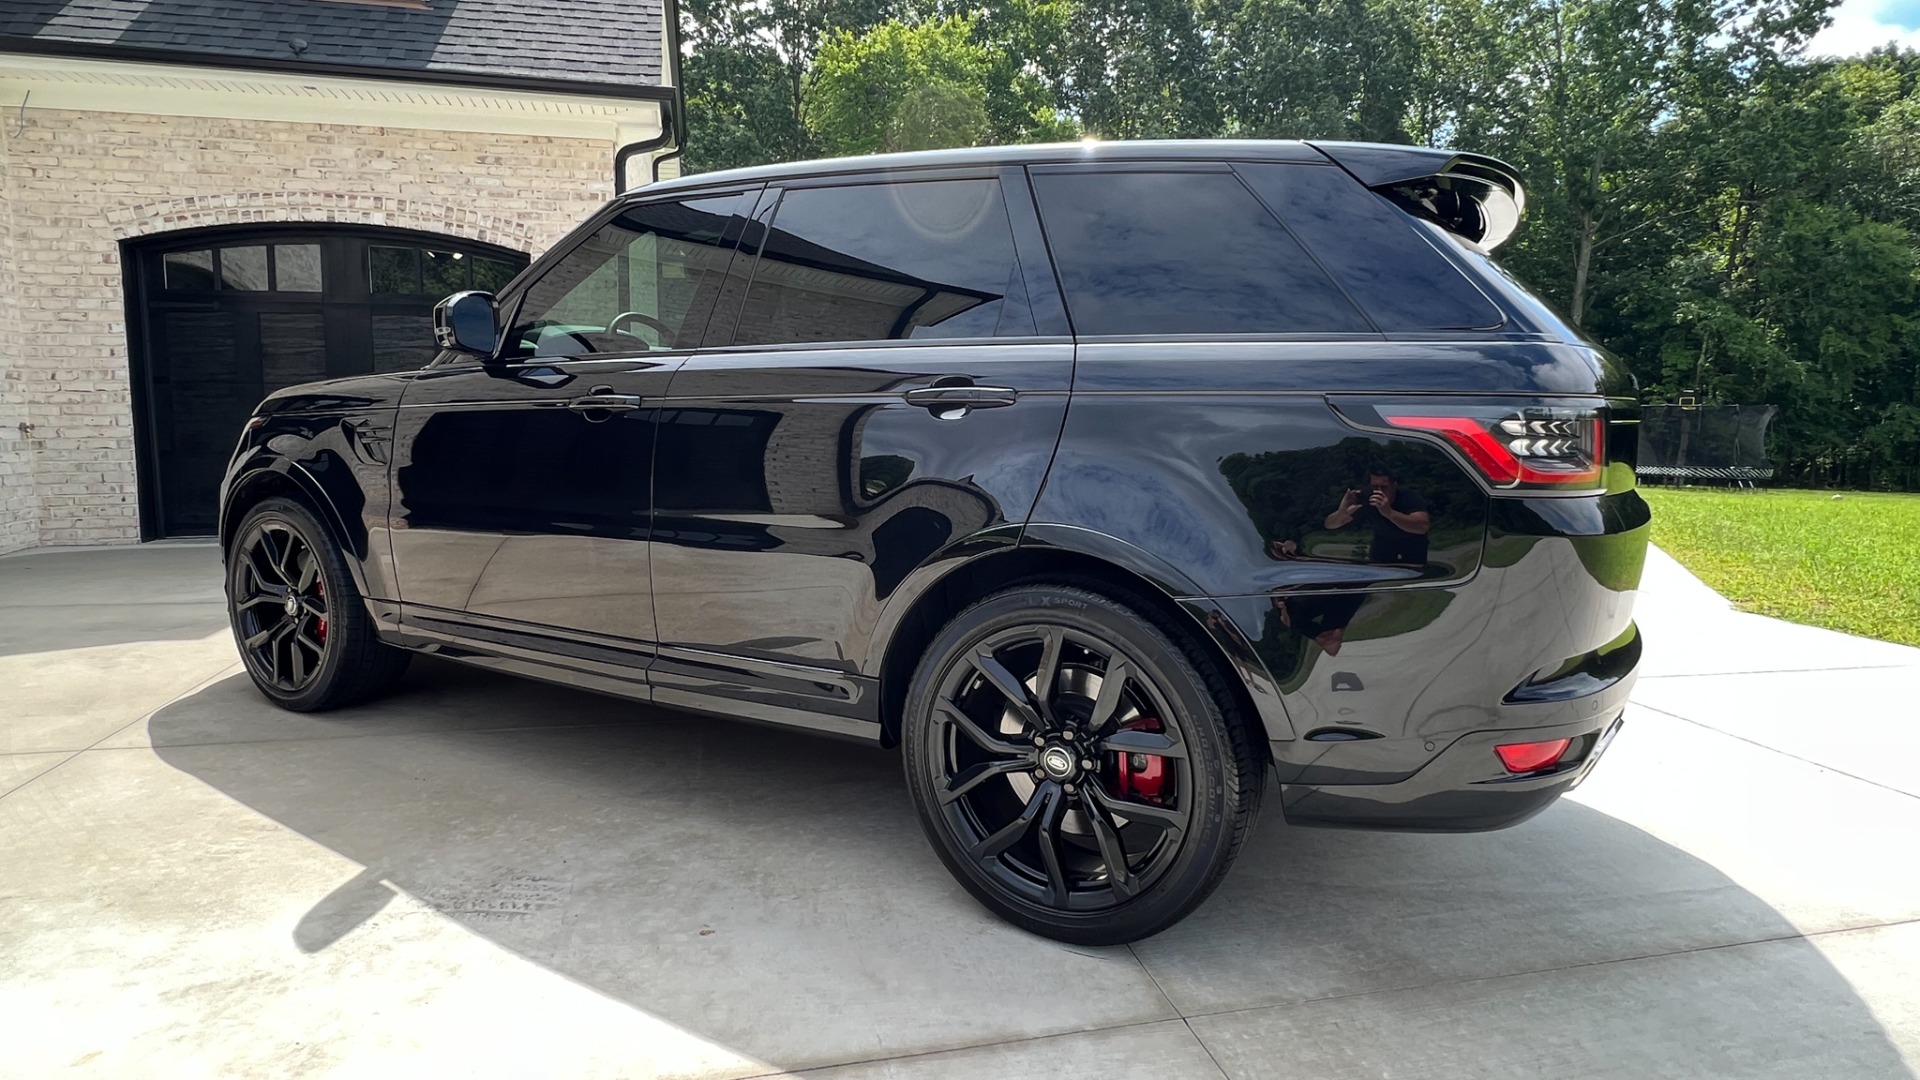 Used 2018 Land Rover Range Rover Sport SVR / 22IN WHEELS / DRIVE PRO / TOW PACK / MERIDIAN SOUN for sale $99,495 at Formula Imports in Charlotte NC 28227 5